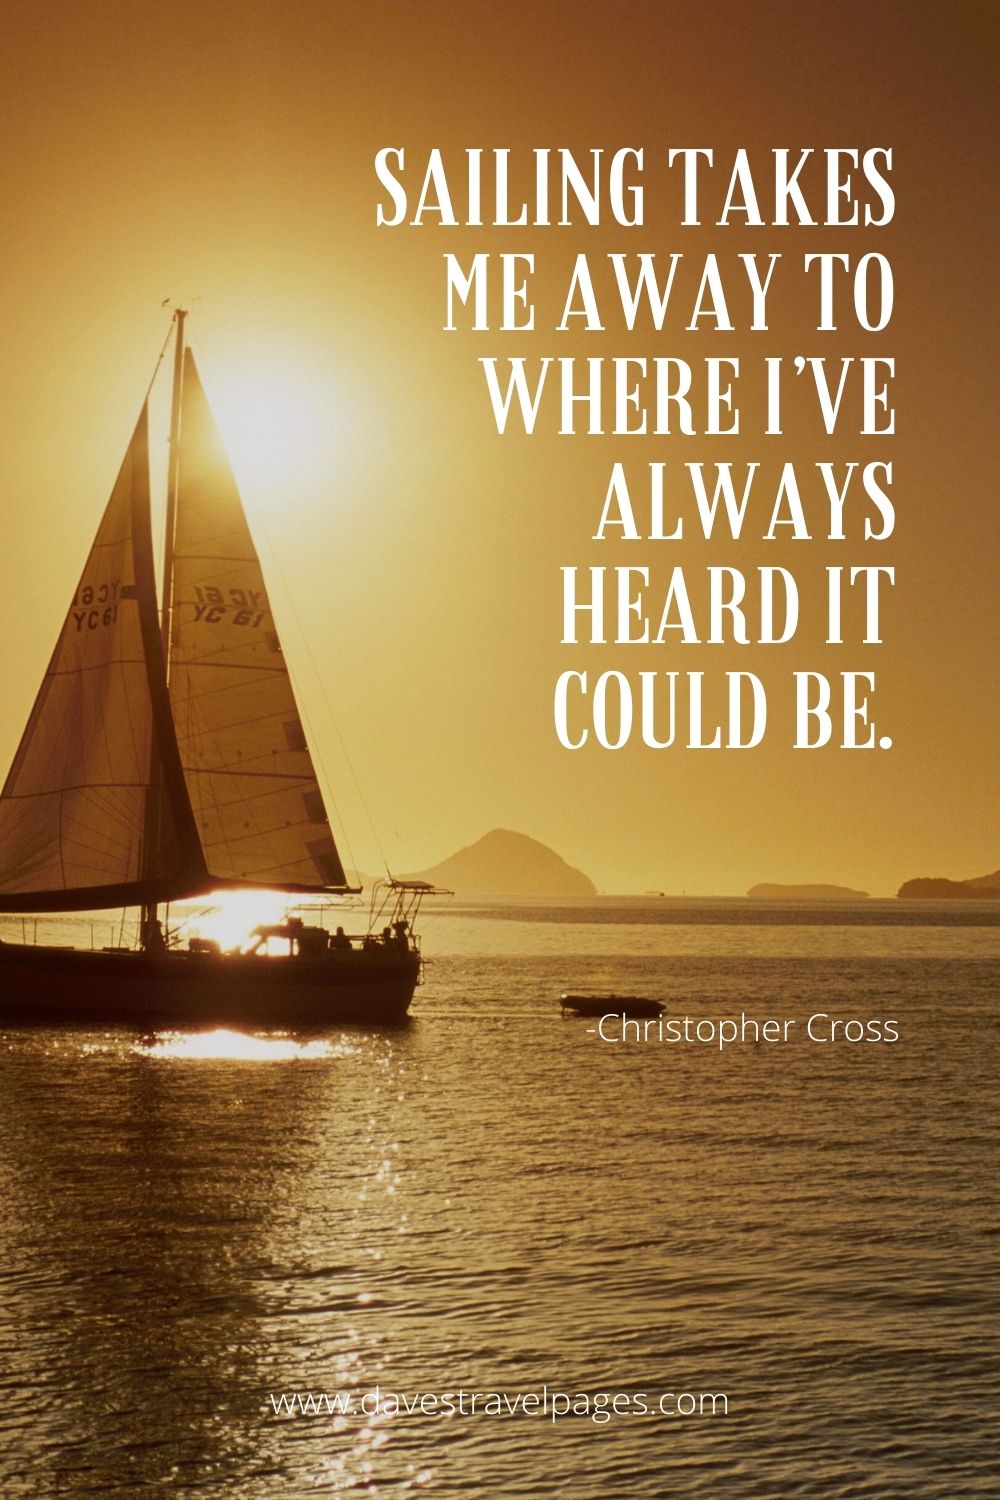 Sailing takes me away to where I’ve always heard it could be.